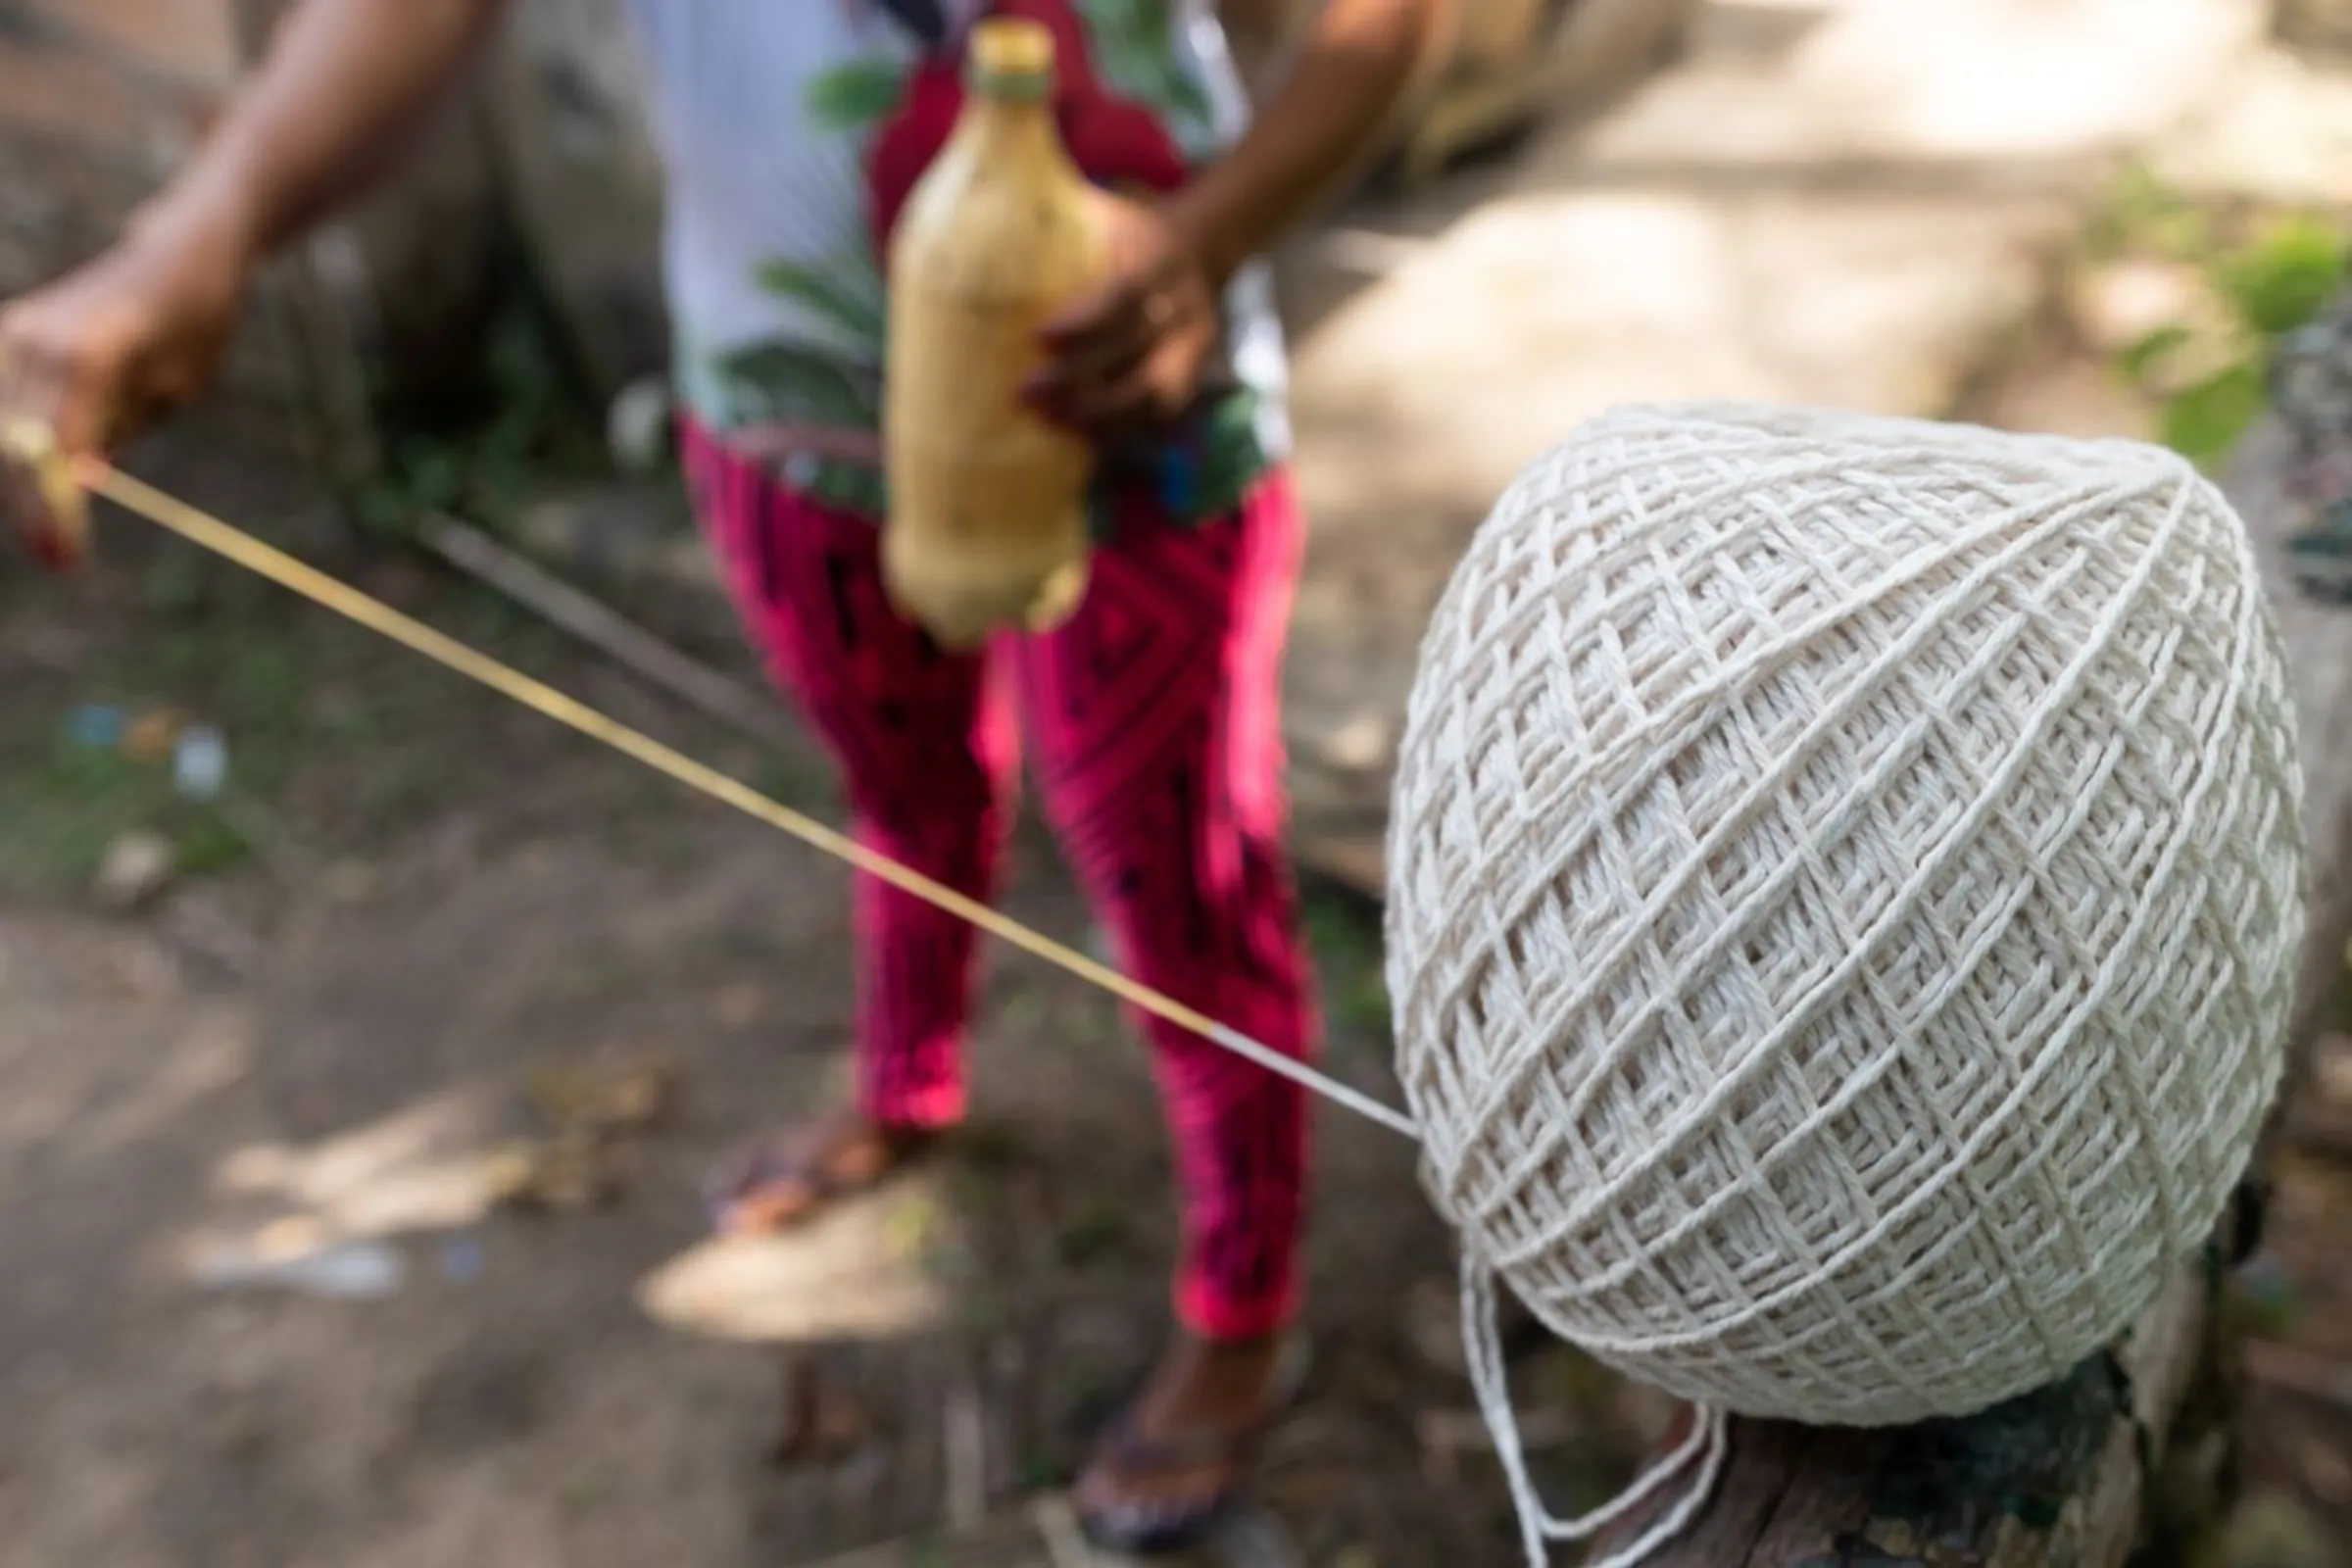 Corina Magno shows a ball of rubber thread near her home on the river island of Cotijuba in Pará, Brazil, January 17, 2023. Thomson Reuters Foundation/Cícero Pedrosa Neto